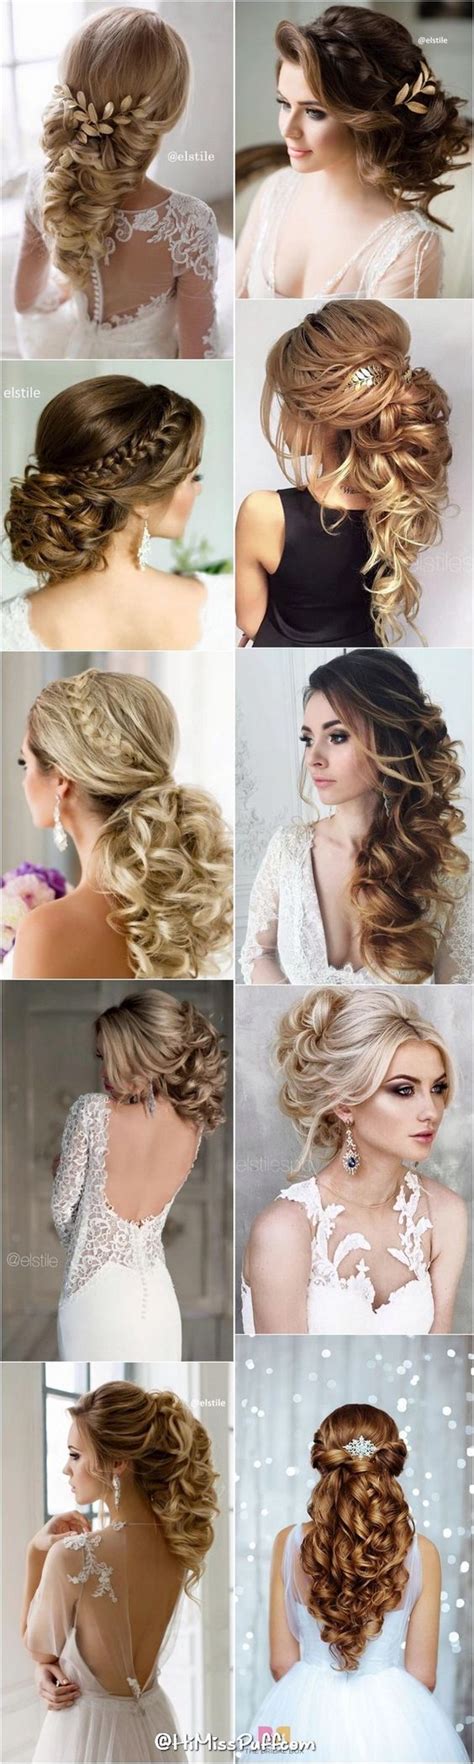 250 Bridal Wedding Hairstyles For Long Hair That Will Inspire Hi Miss